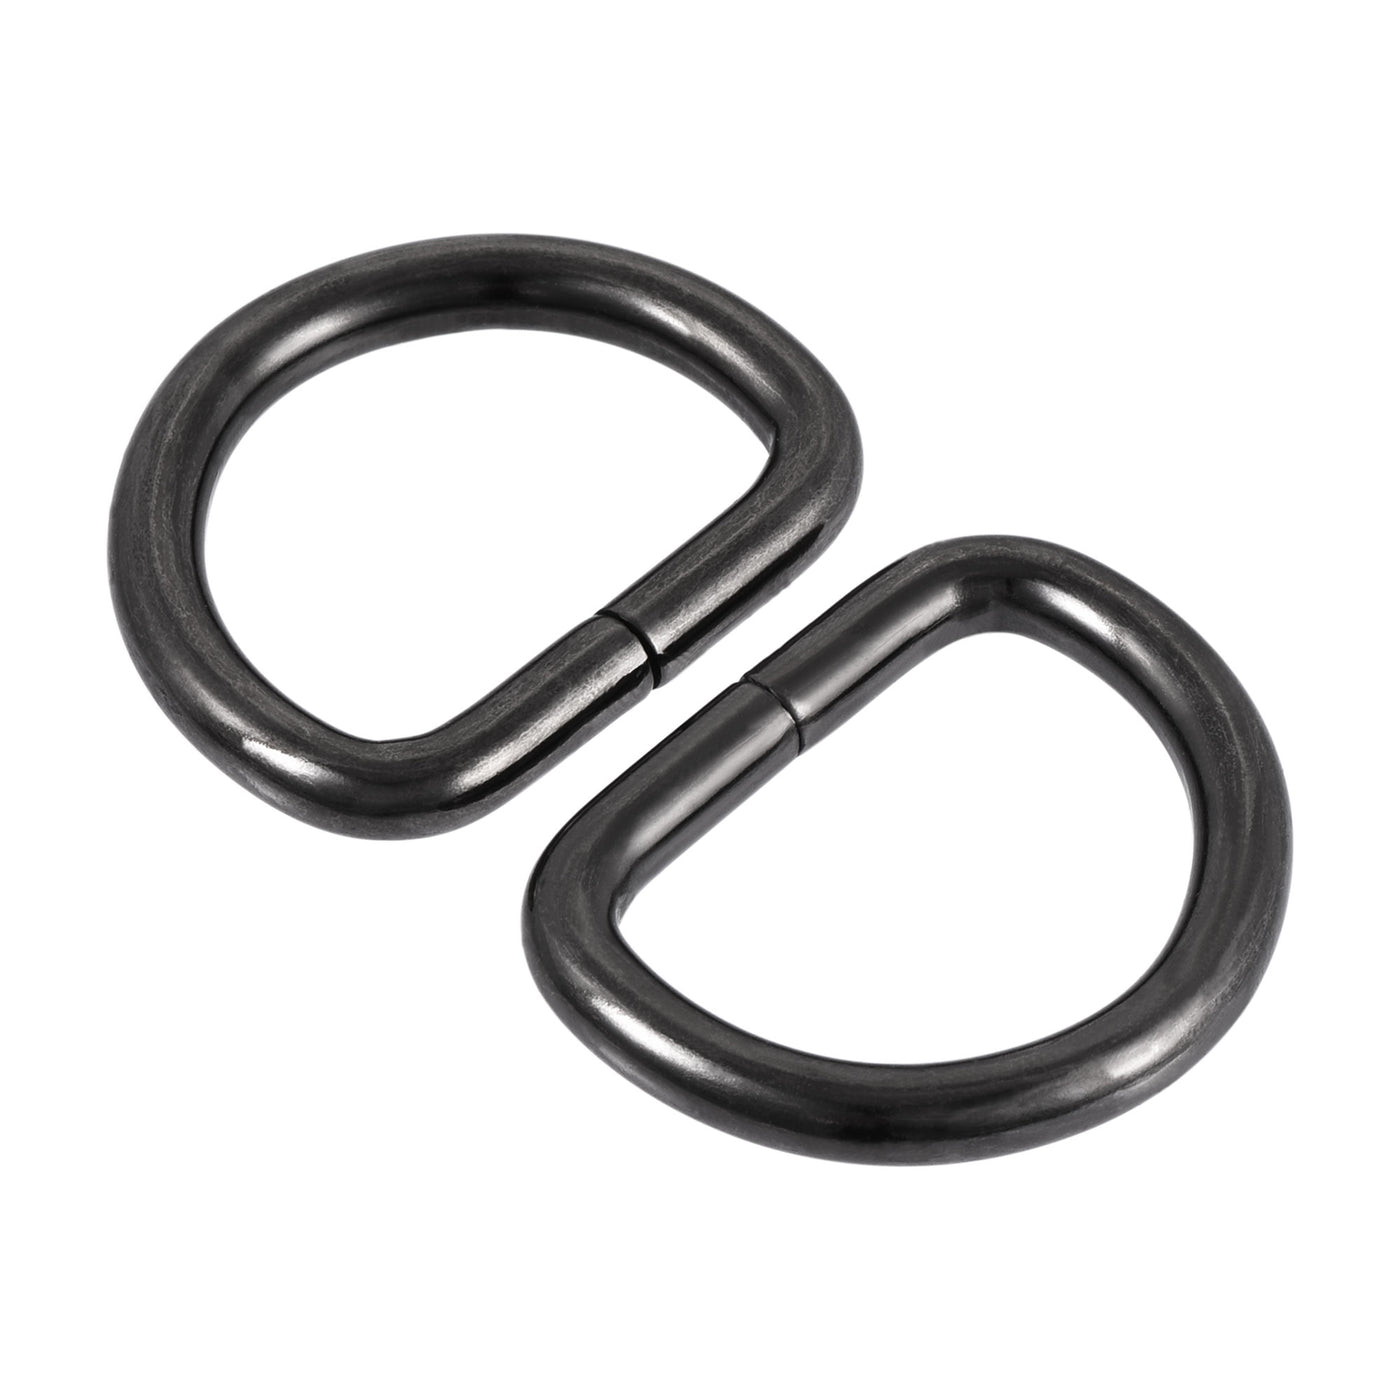 uxcell Uxcell Metal D Ring 0.98"(25mm) D-Rings Buckle for Hardware Bags Belts Craft DIY Accessories Black 50pcs